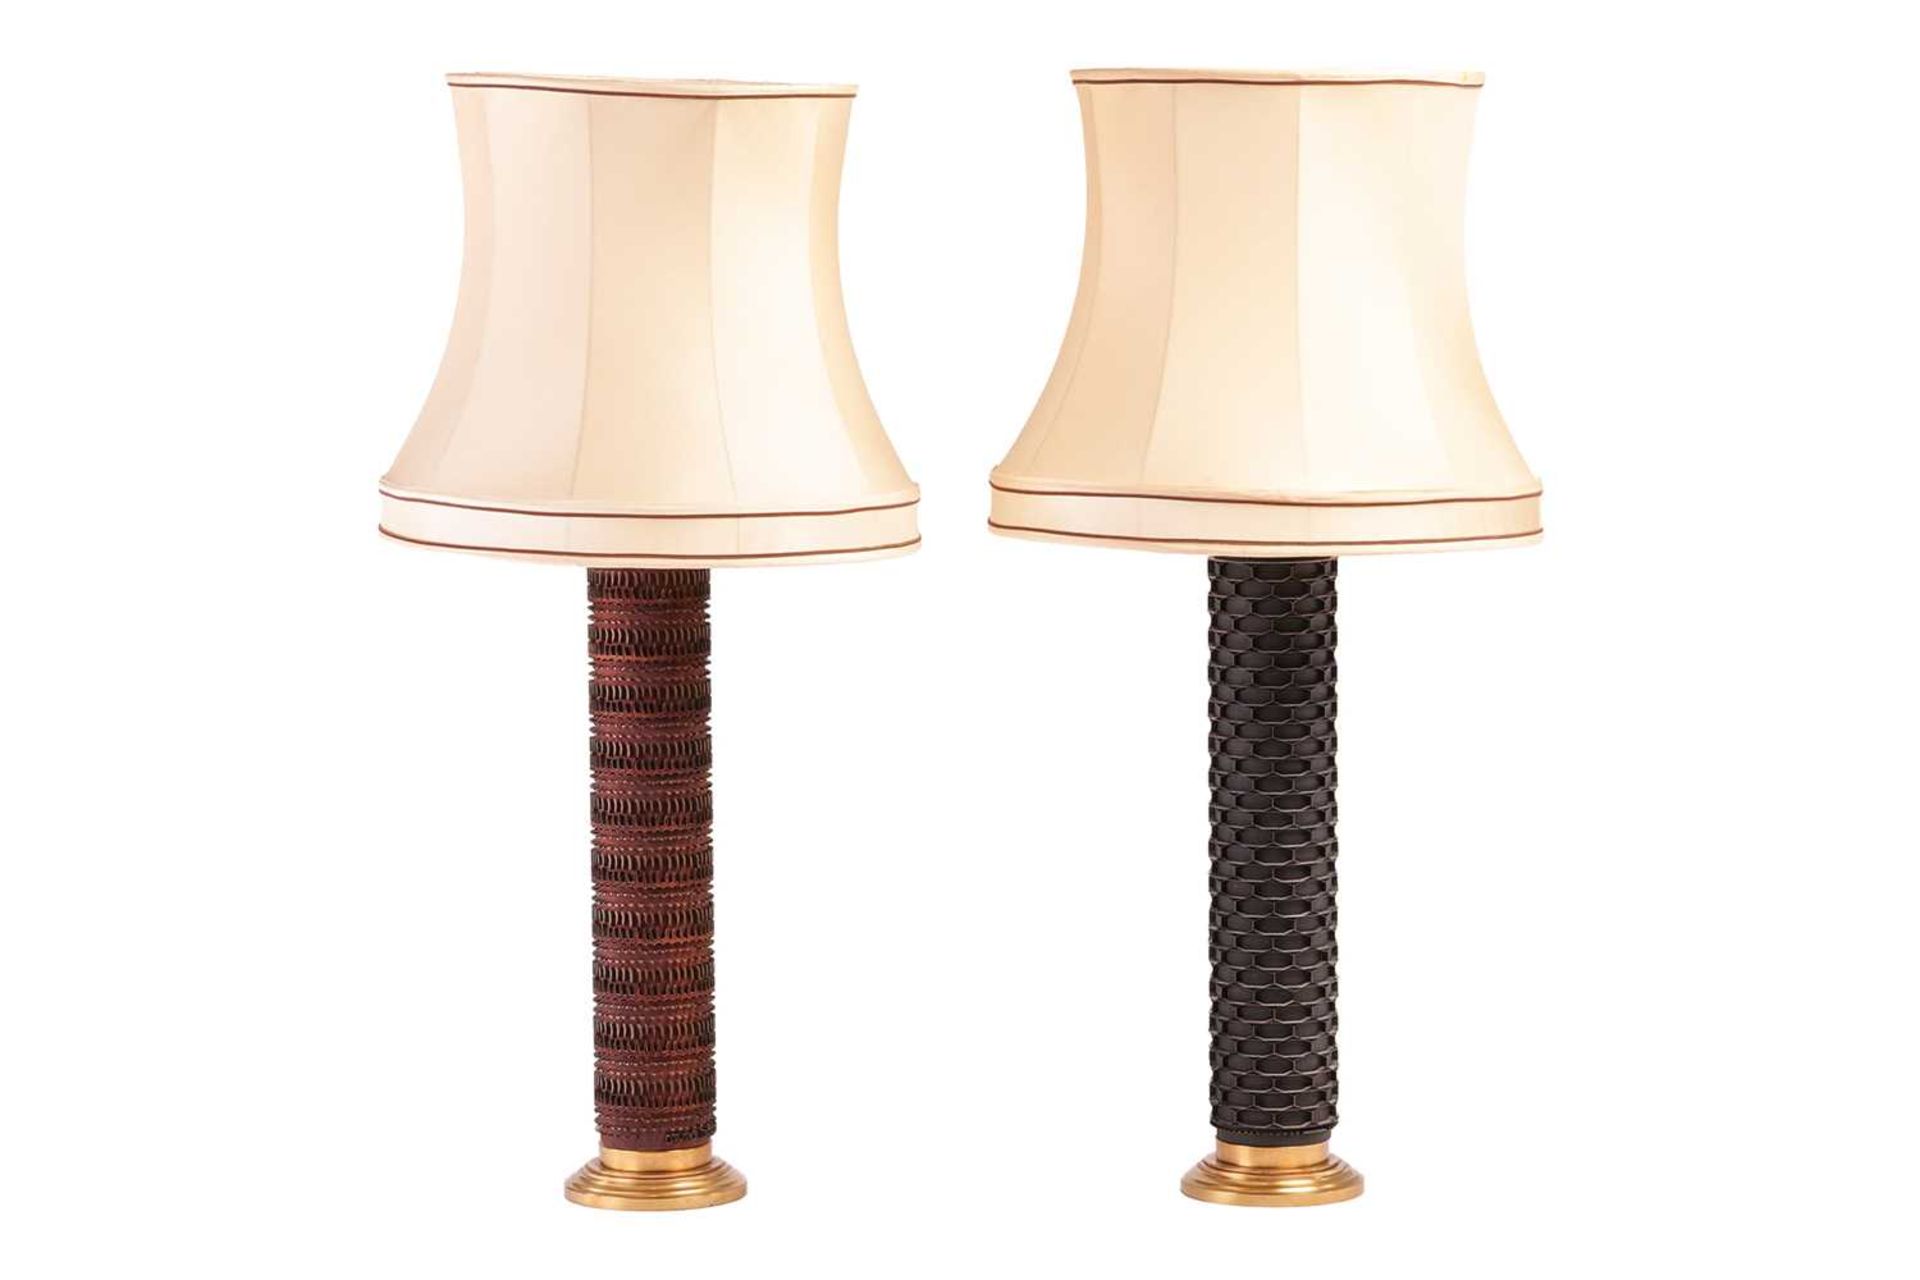 Two contemporary large table lamps, made in Denmark, the columns formed from wallpaper printing